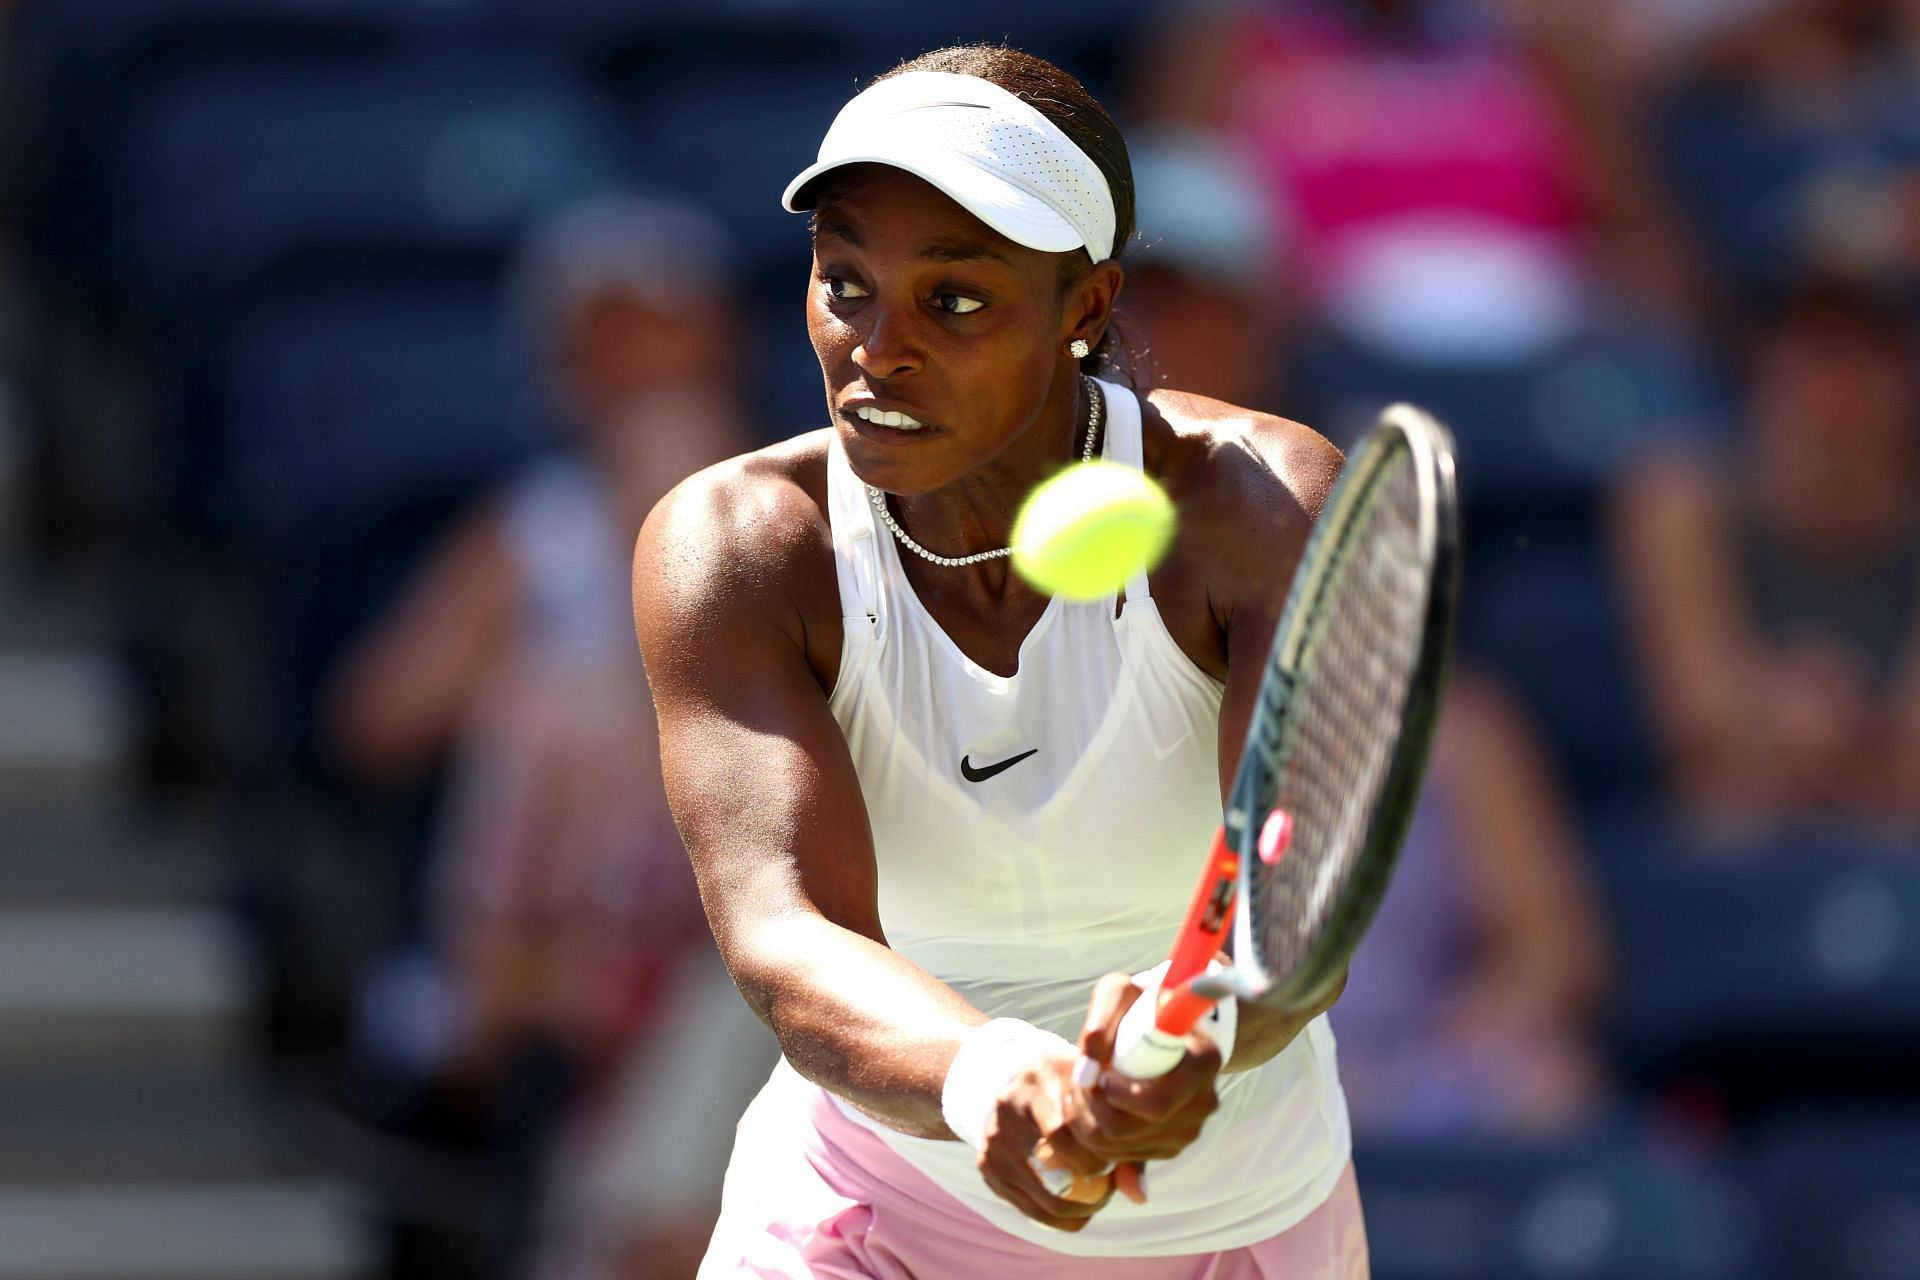 Sloane Stephens at the 2022 US Open